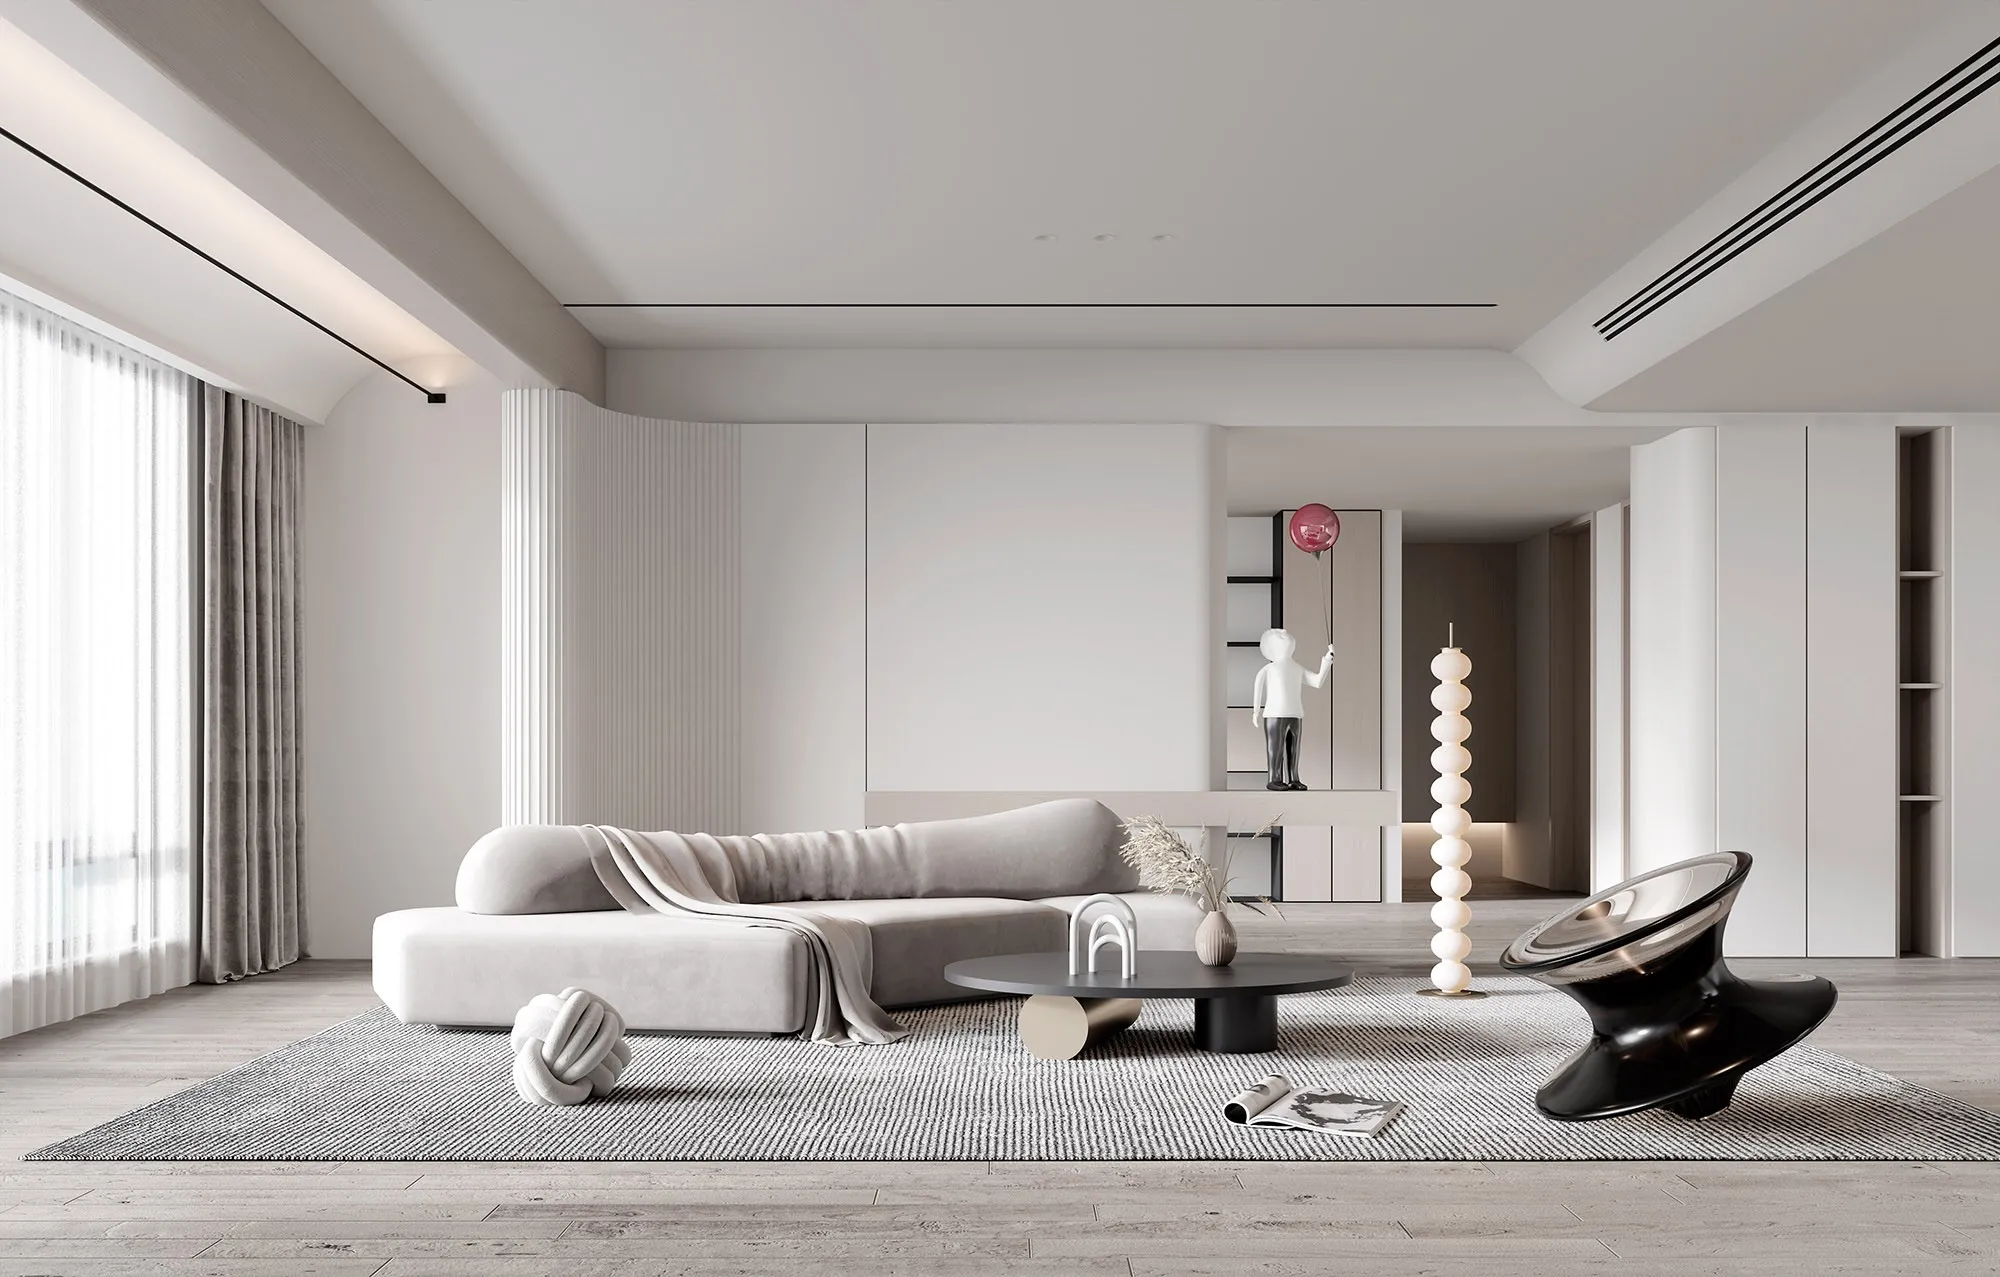 HOUSE SPACE 3D SCENES – LIVING ROOM – 0008